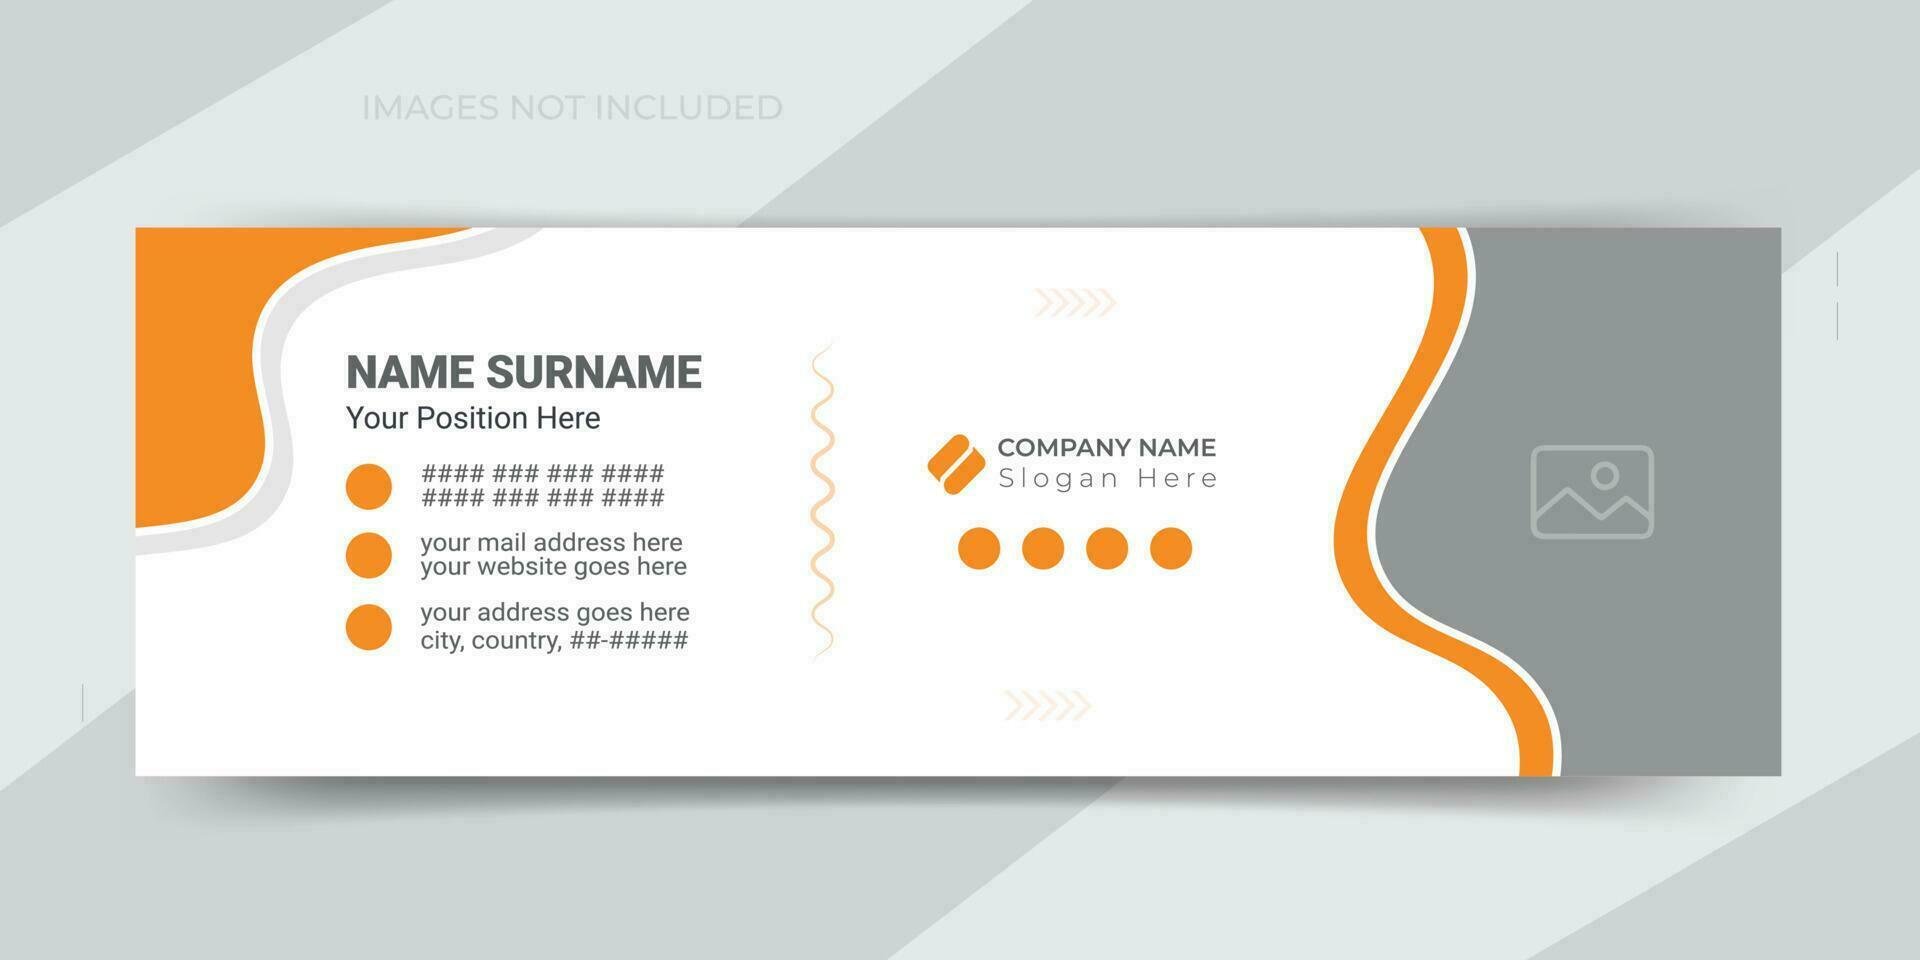 Minimal-style corporate business agency email signature or email footer template design vector